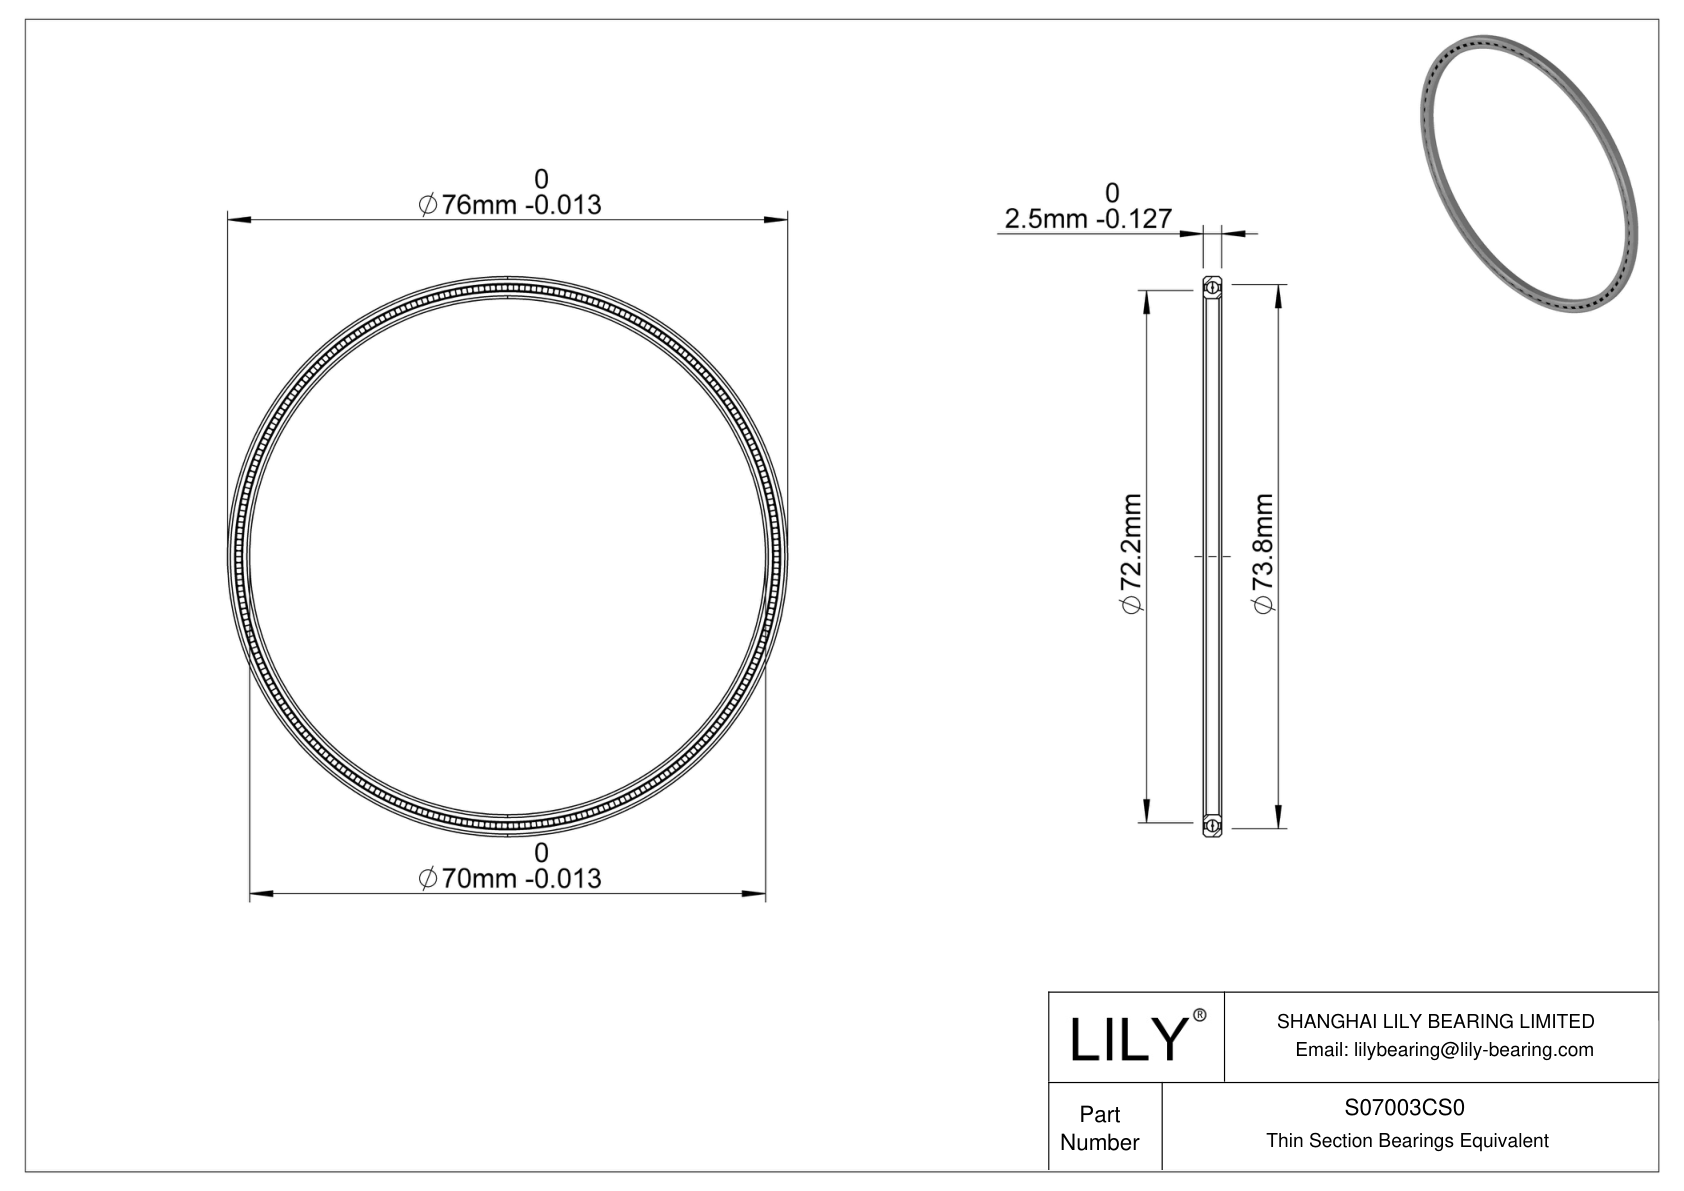 S07003CS0 Constant Section (CS) Bearings cad drawing